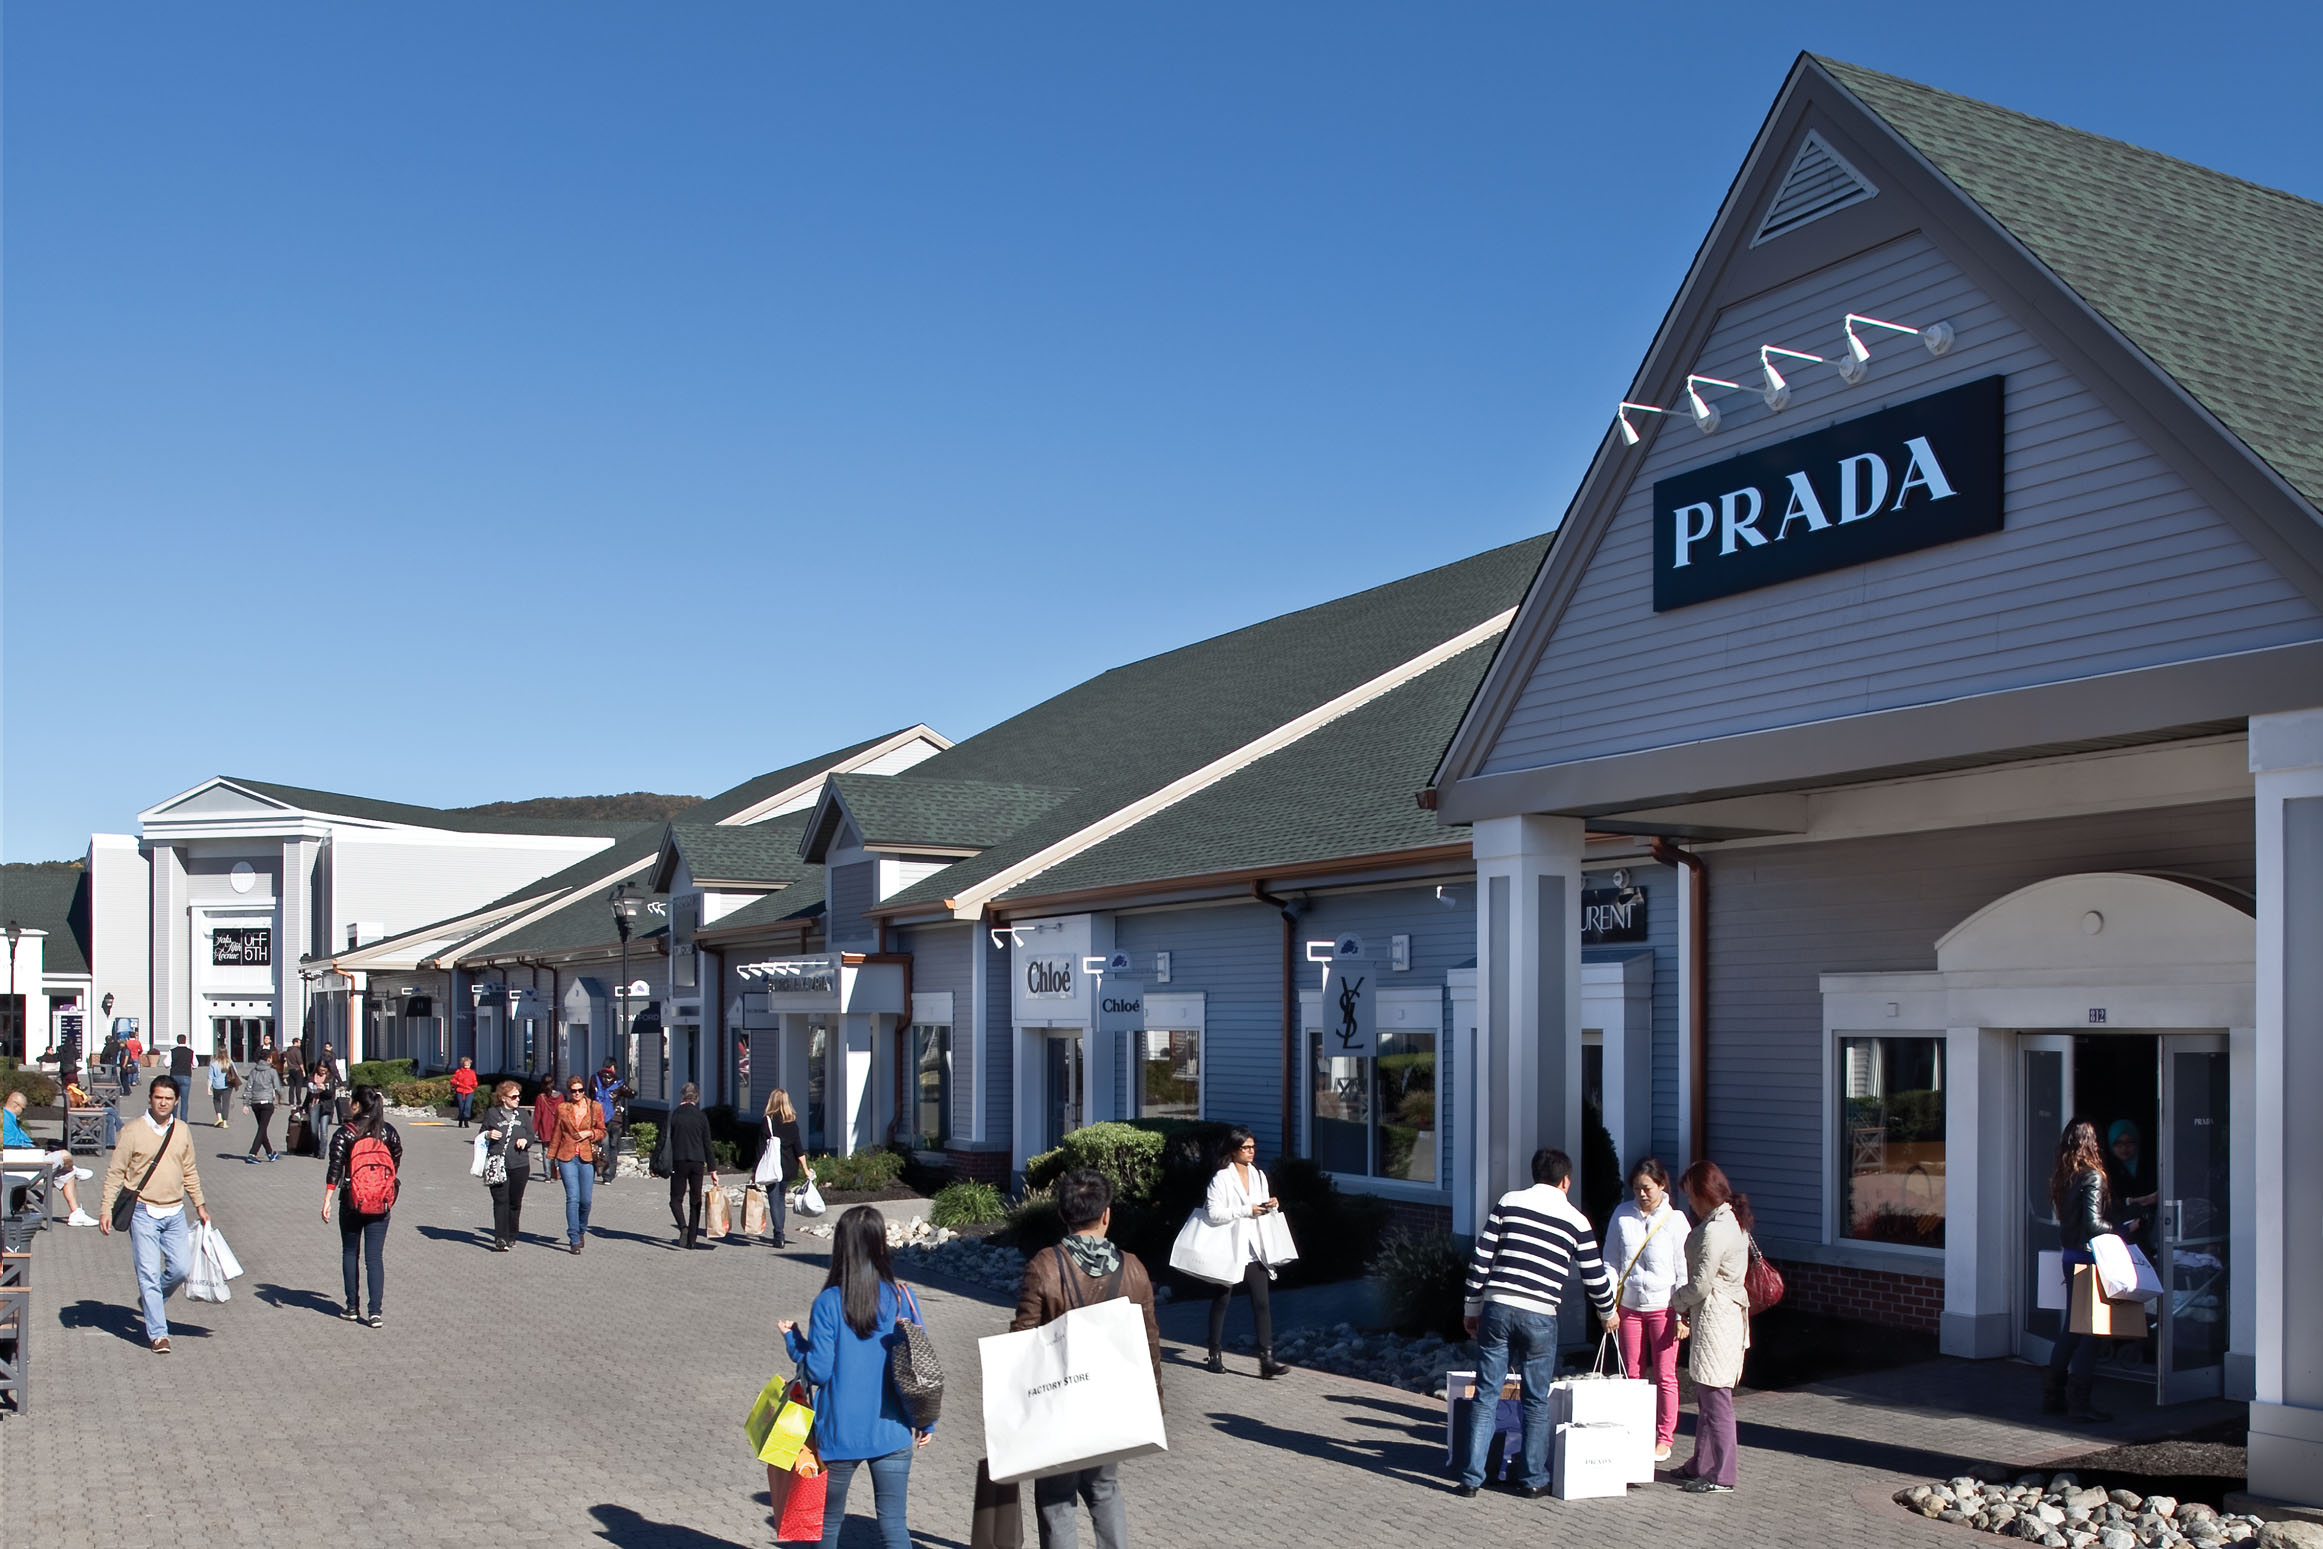 Woodbury Common Premium Outlets from New York | Roundtrip Bus Transport  Service - KKday